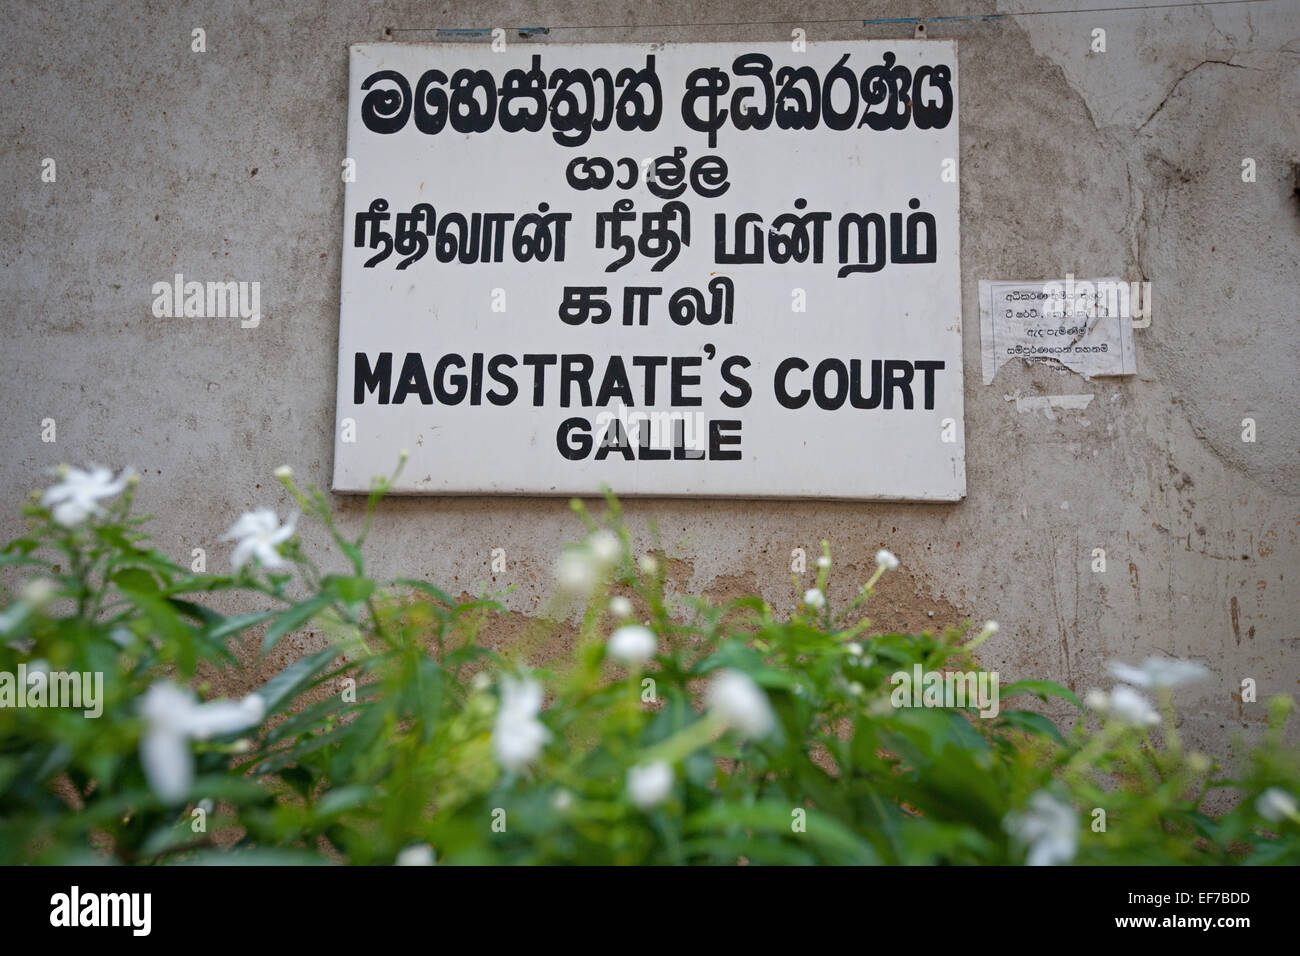 MAGISTRATE'S COURT GALLE Stock Photo